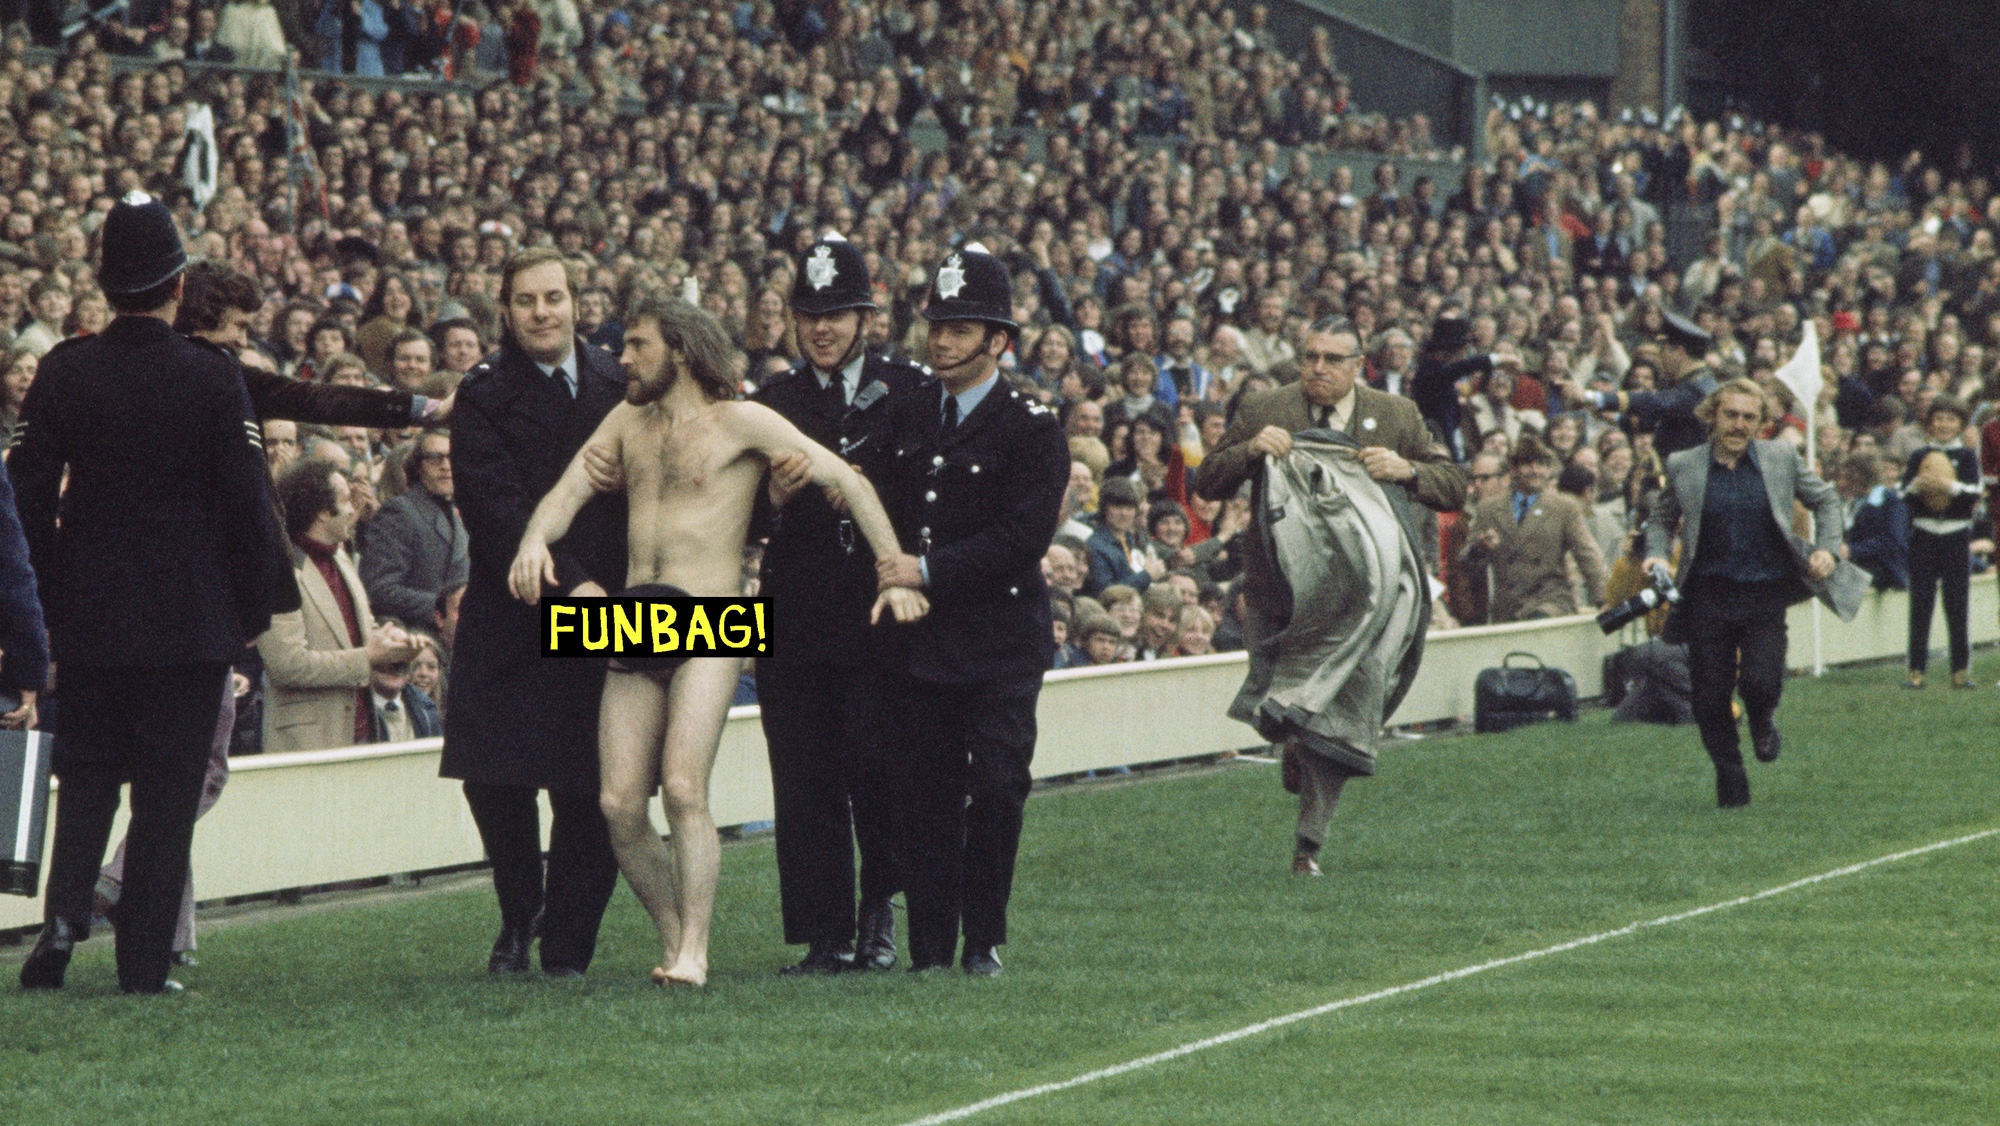 16 Mar 1974: Police Constable Michael O’Brien uses his helmet to cover up streaker Bruce Perry as he is led away during the Five Nations Championship match between England and Wales at Twickenham in London, England. England won the match 16-12. Visions of Sport. (Photo by Tony Duffy/Allsport/Getty Images)